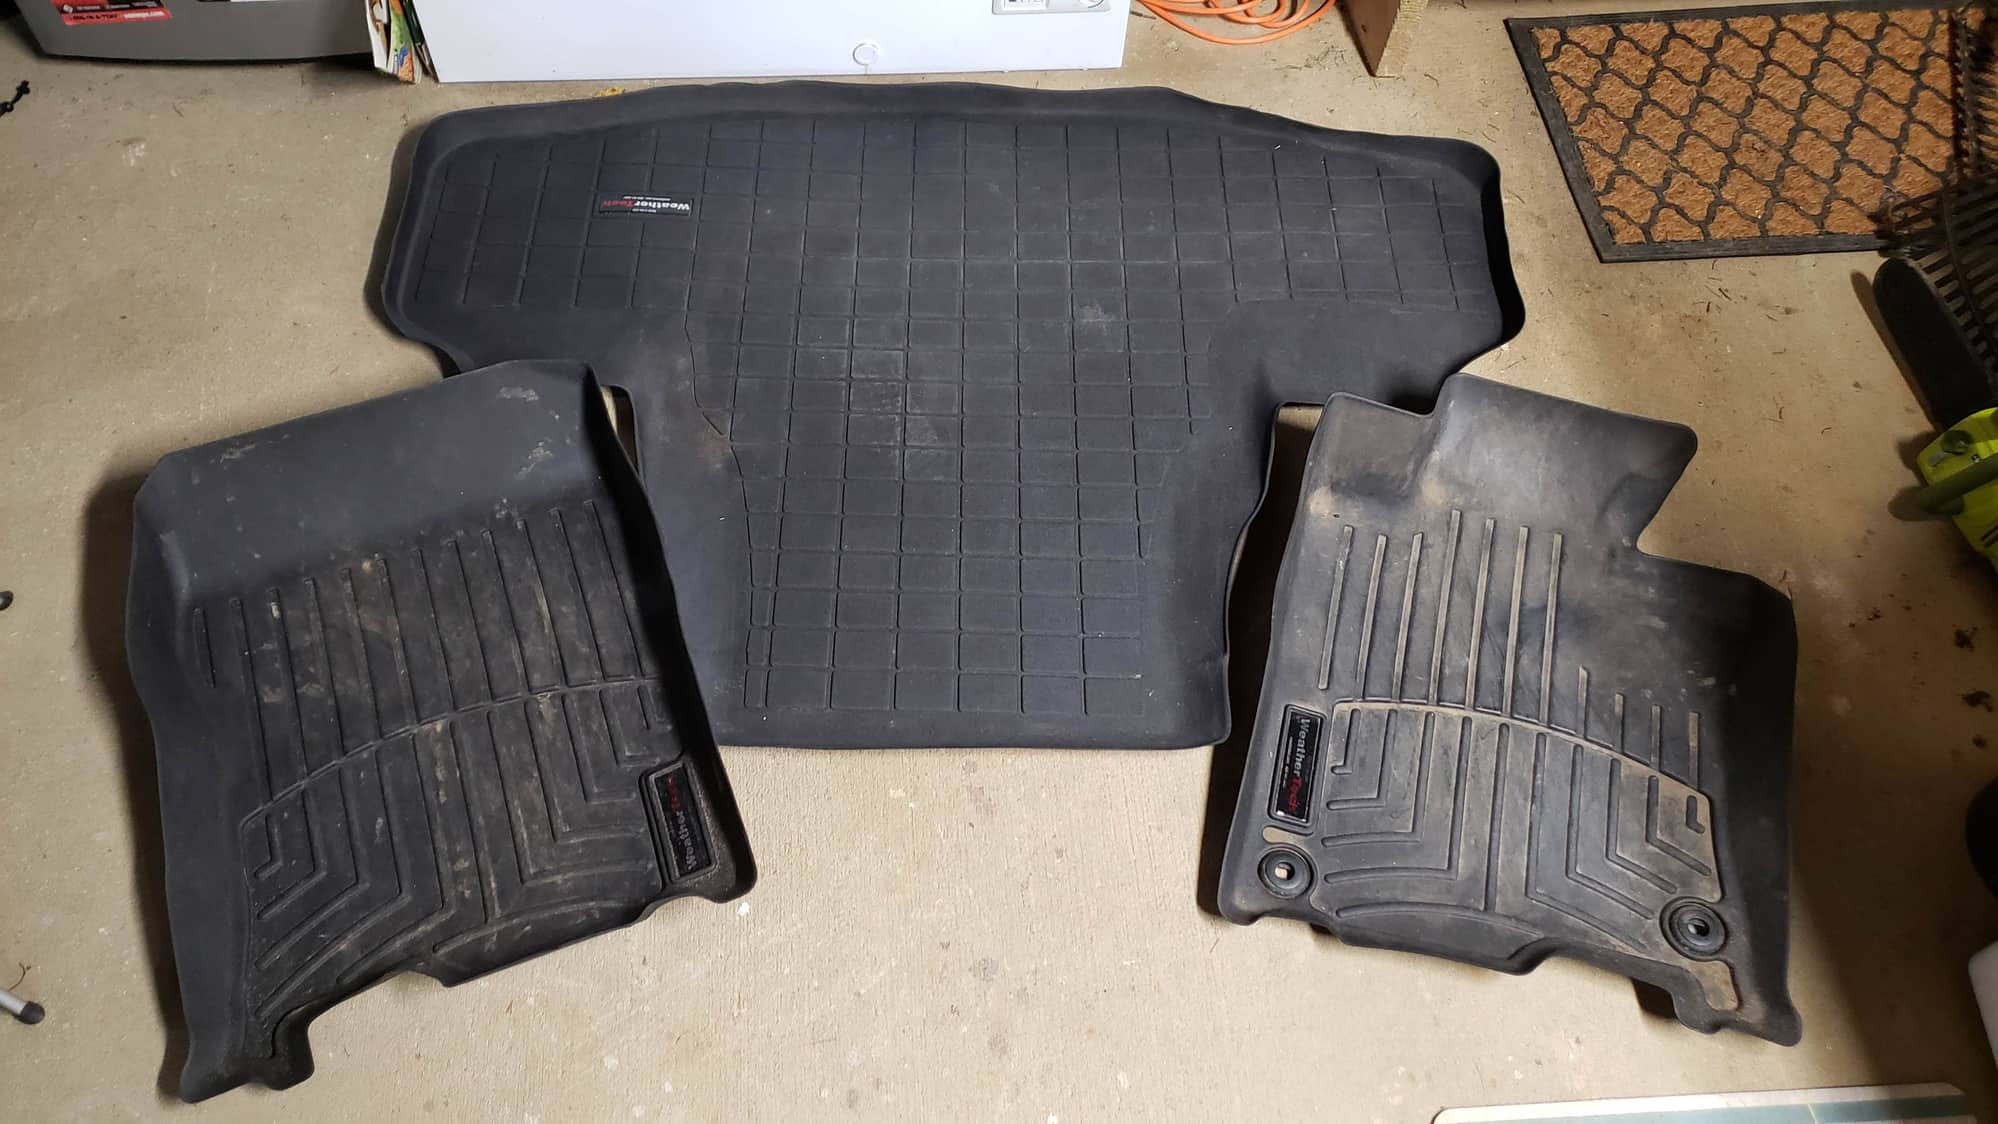 Interior/Upholstery - SOLD: 2013 Acura TSX Weather Tech Floor Mats - Used - 2013 Acura TSX - Gaithersburg, MD 20877, United States